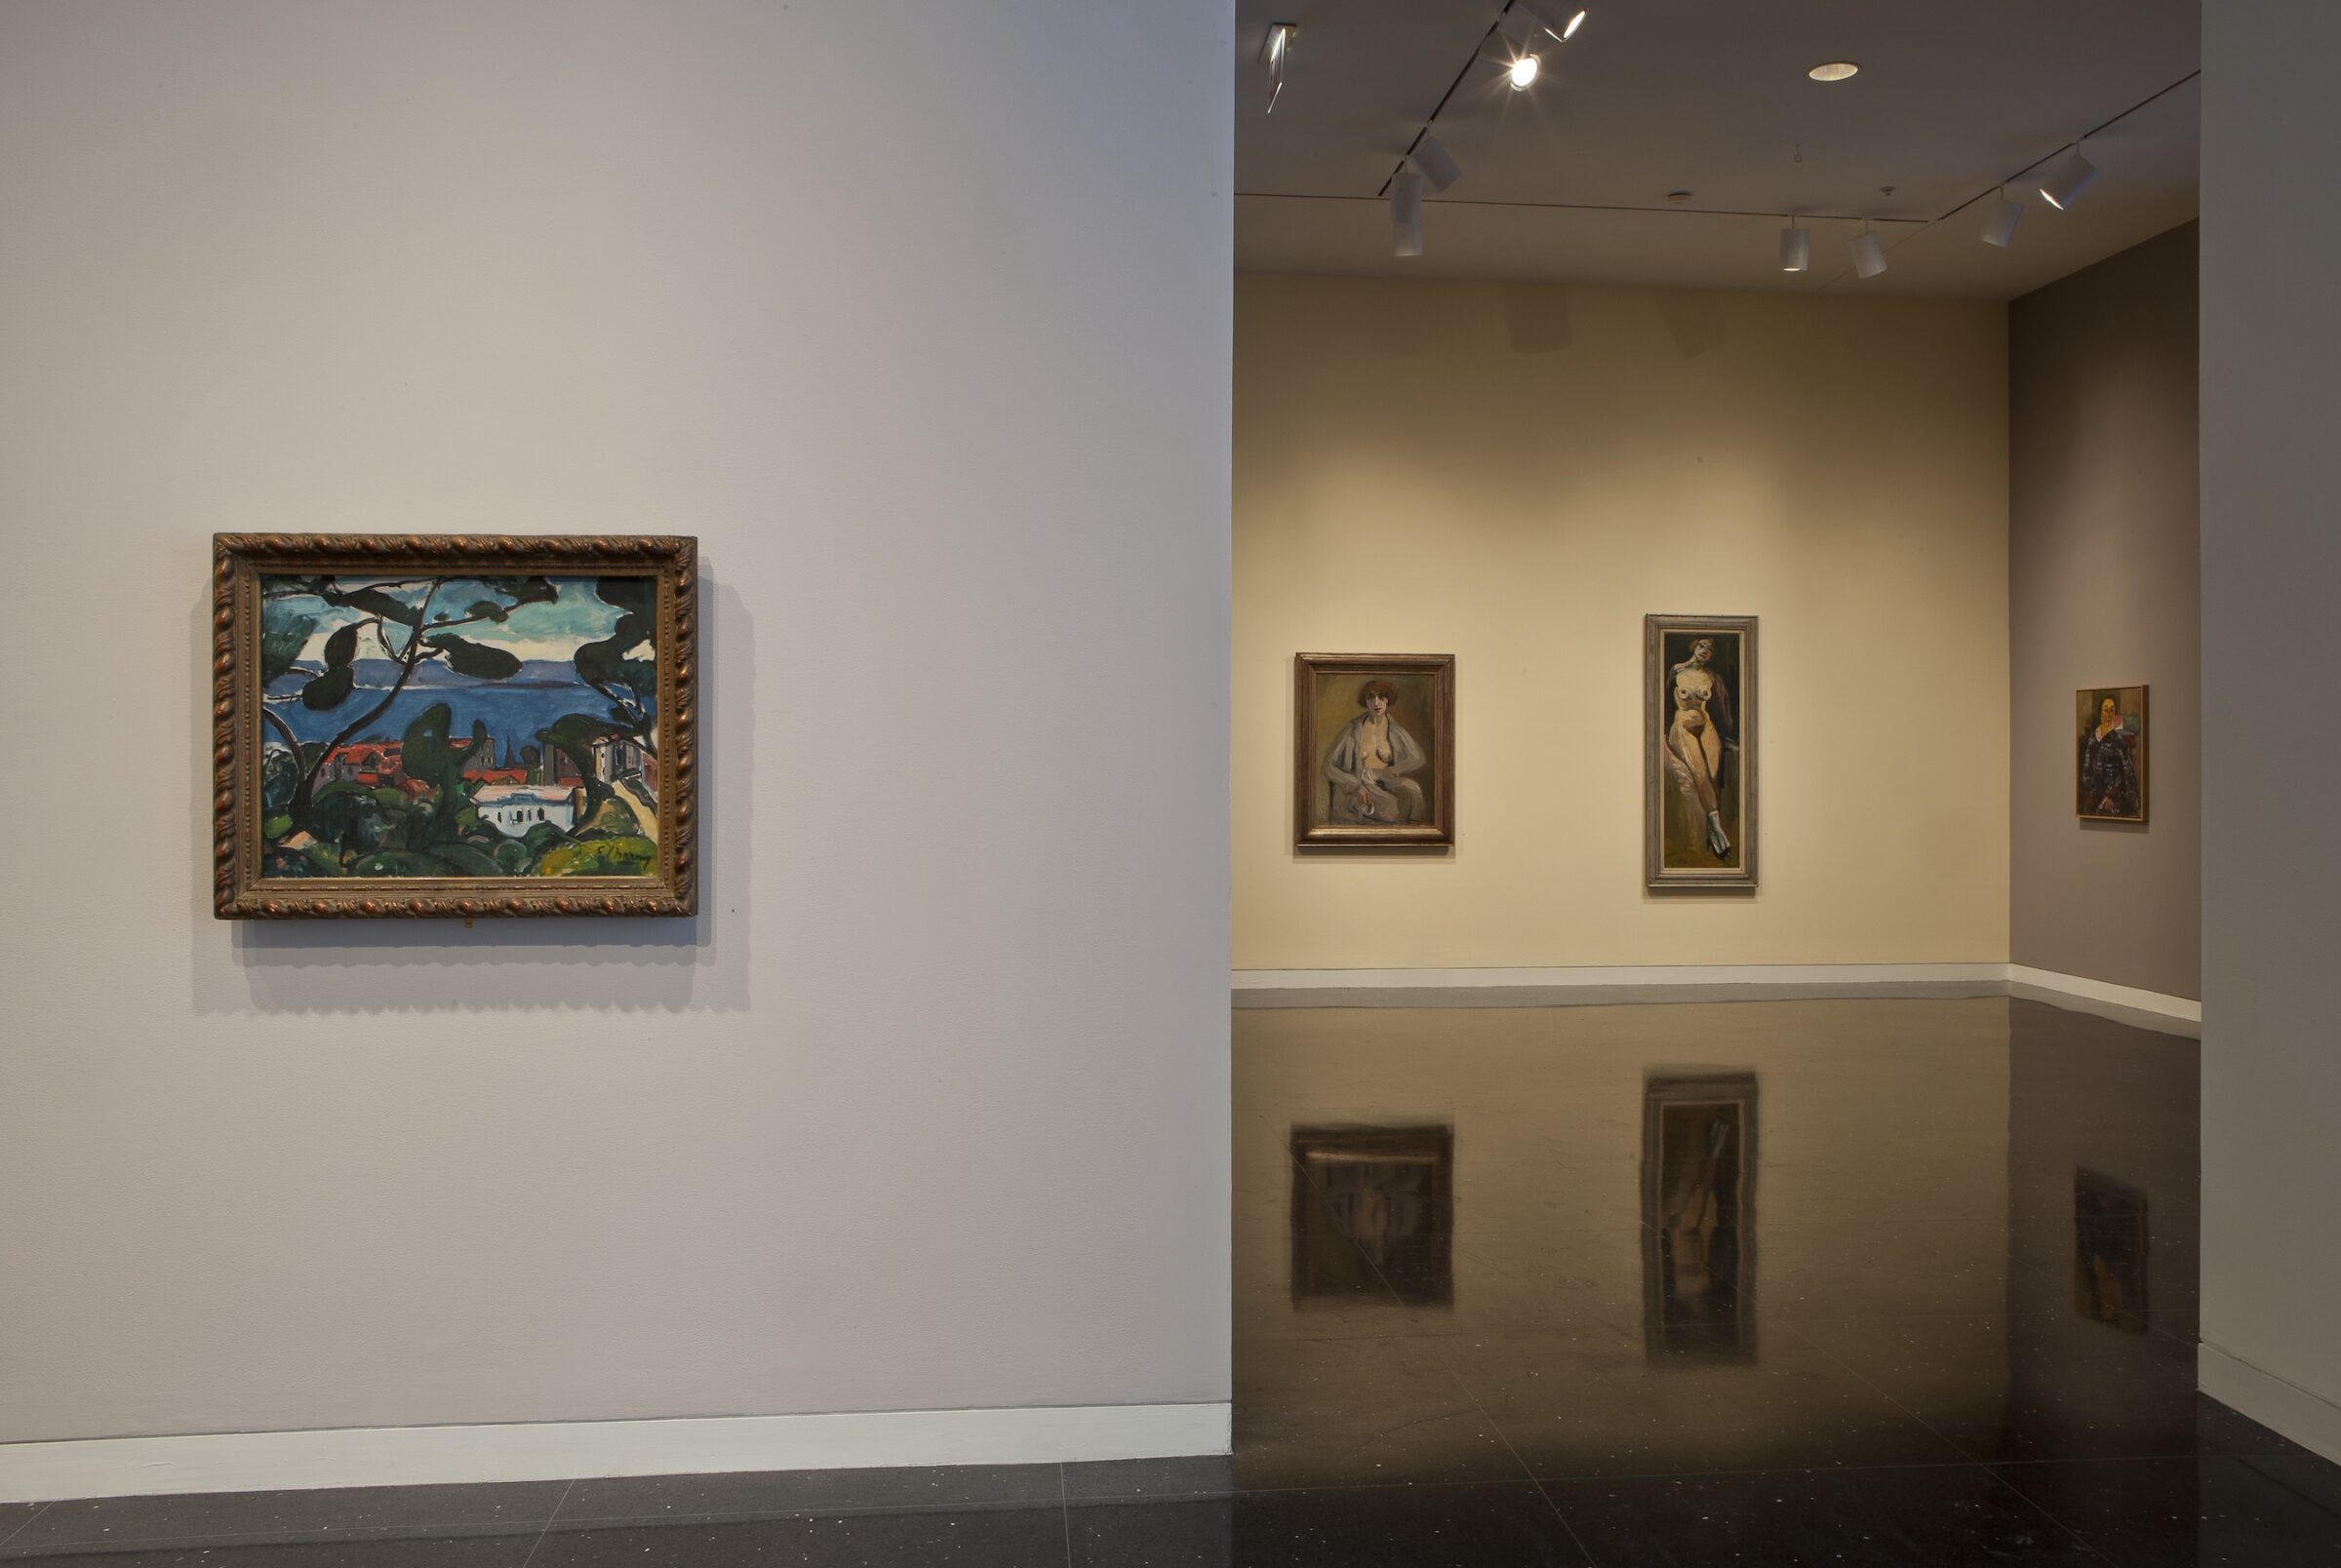 A landscape painting of a distant town seen through trees hangs in an ornate gold frame on a beige/gray gallery wall. In the distant gallery, two framed painted nudes hang on the wall.